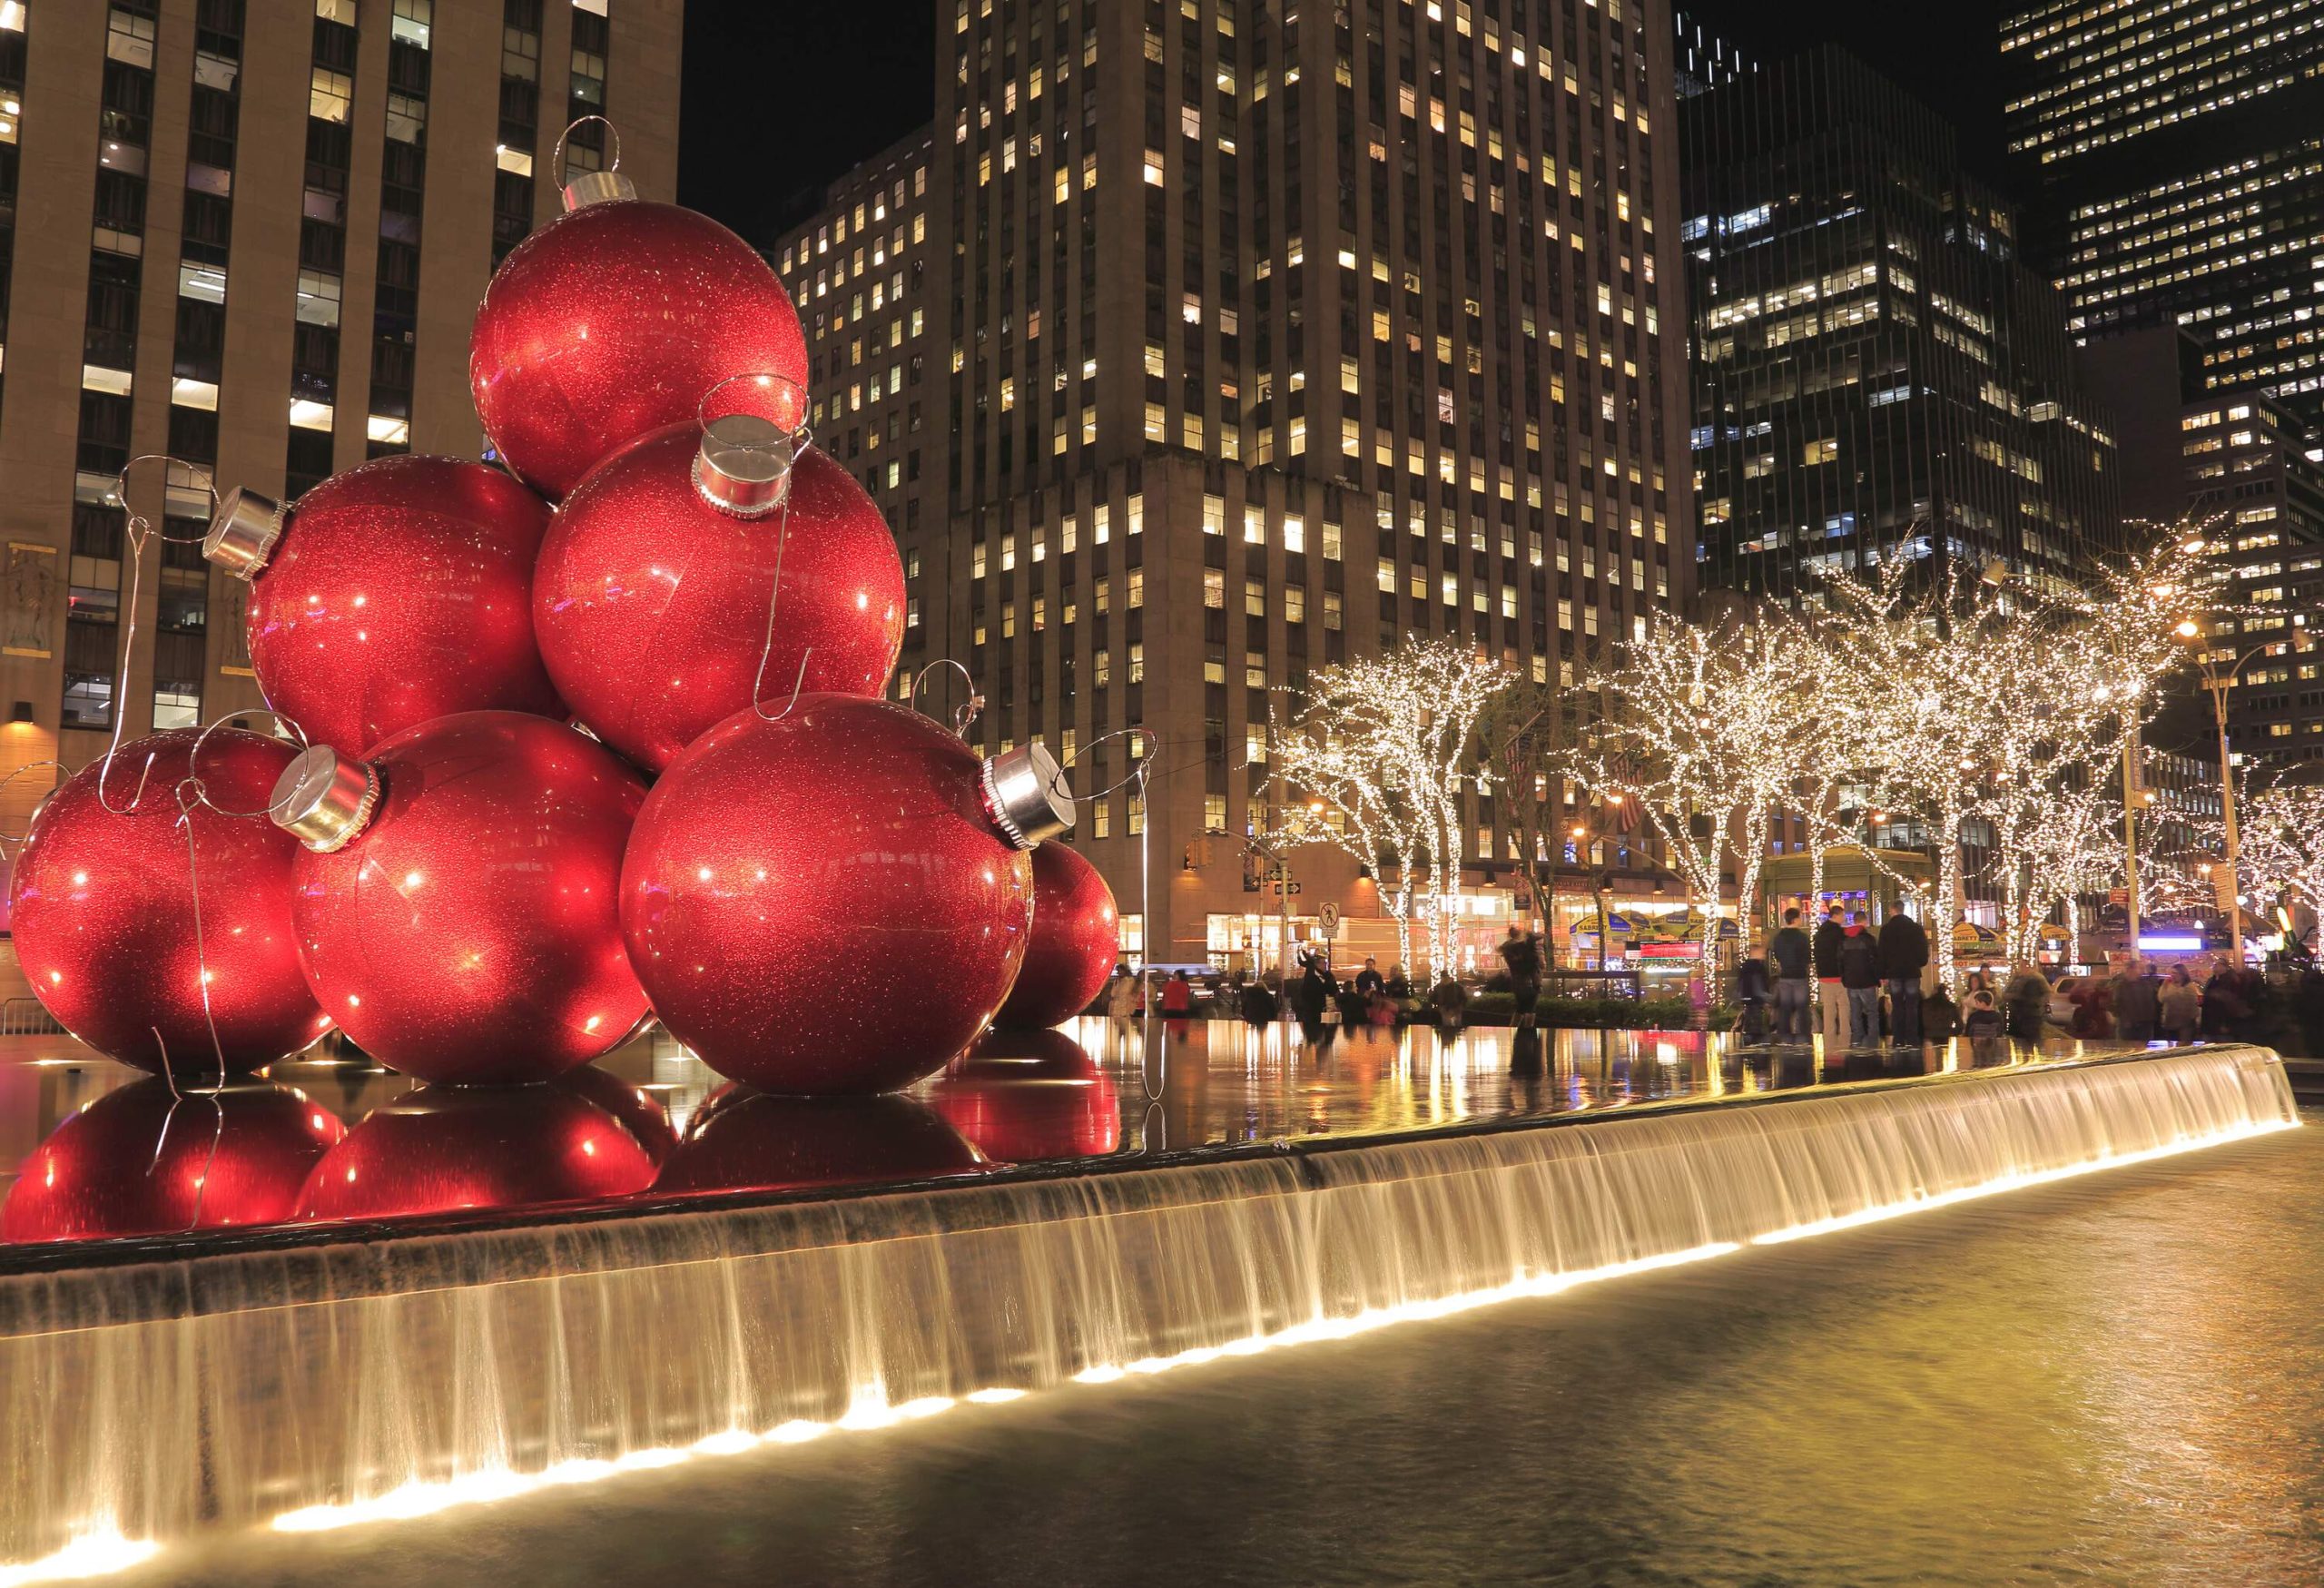 Giant red Christmas balls on top of the fountain surrounded by the tall building.